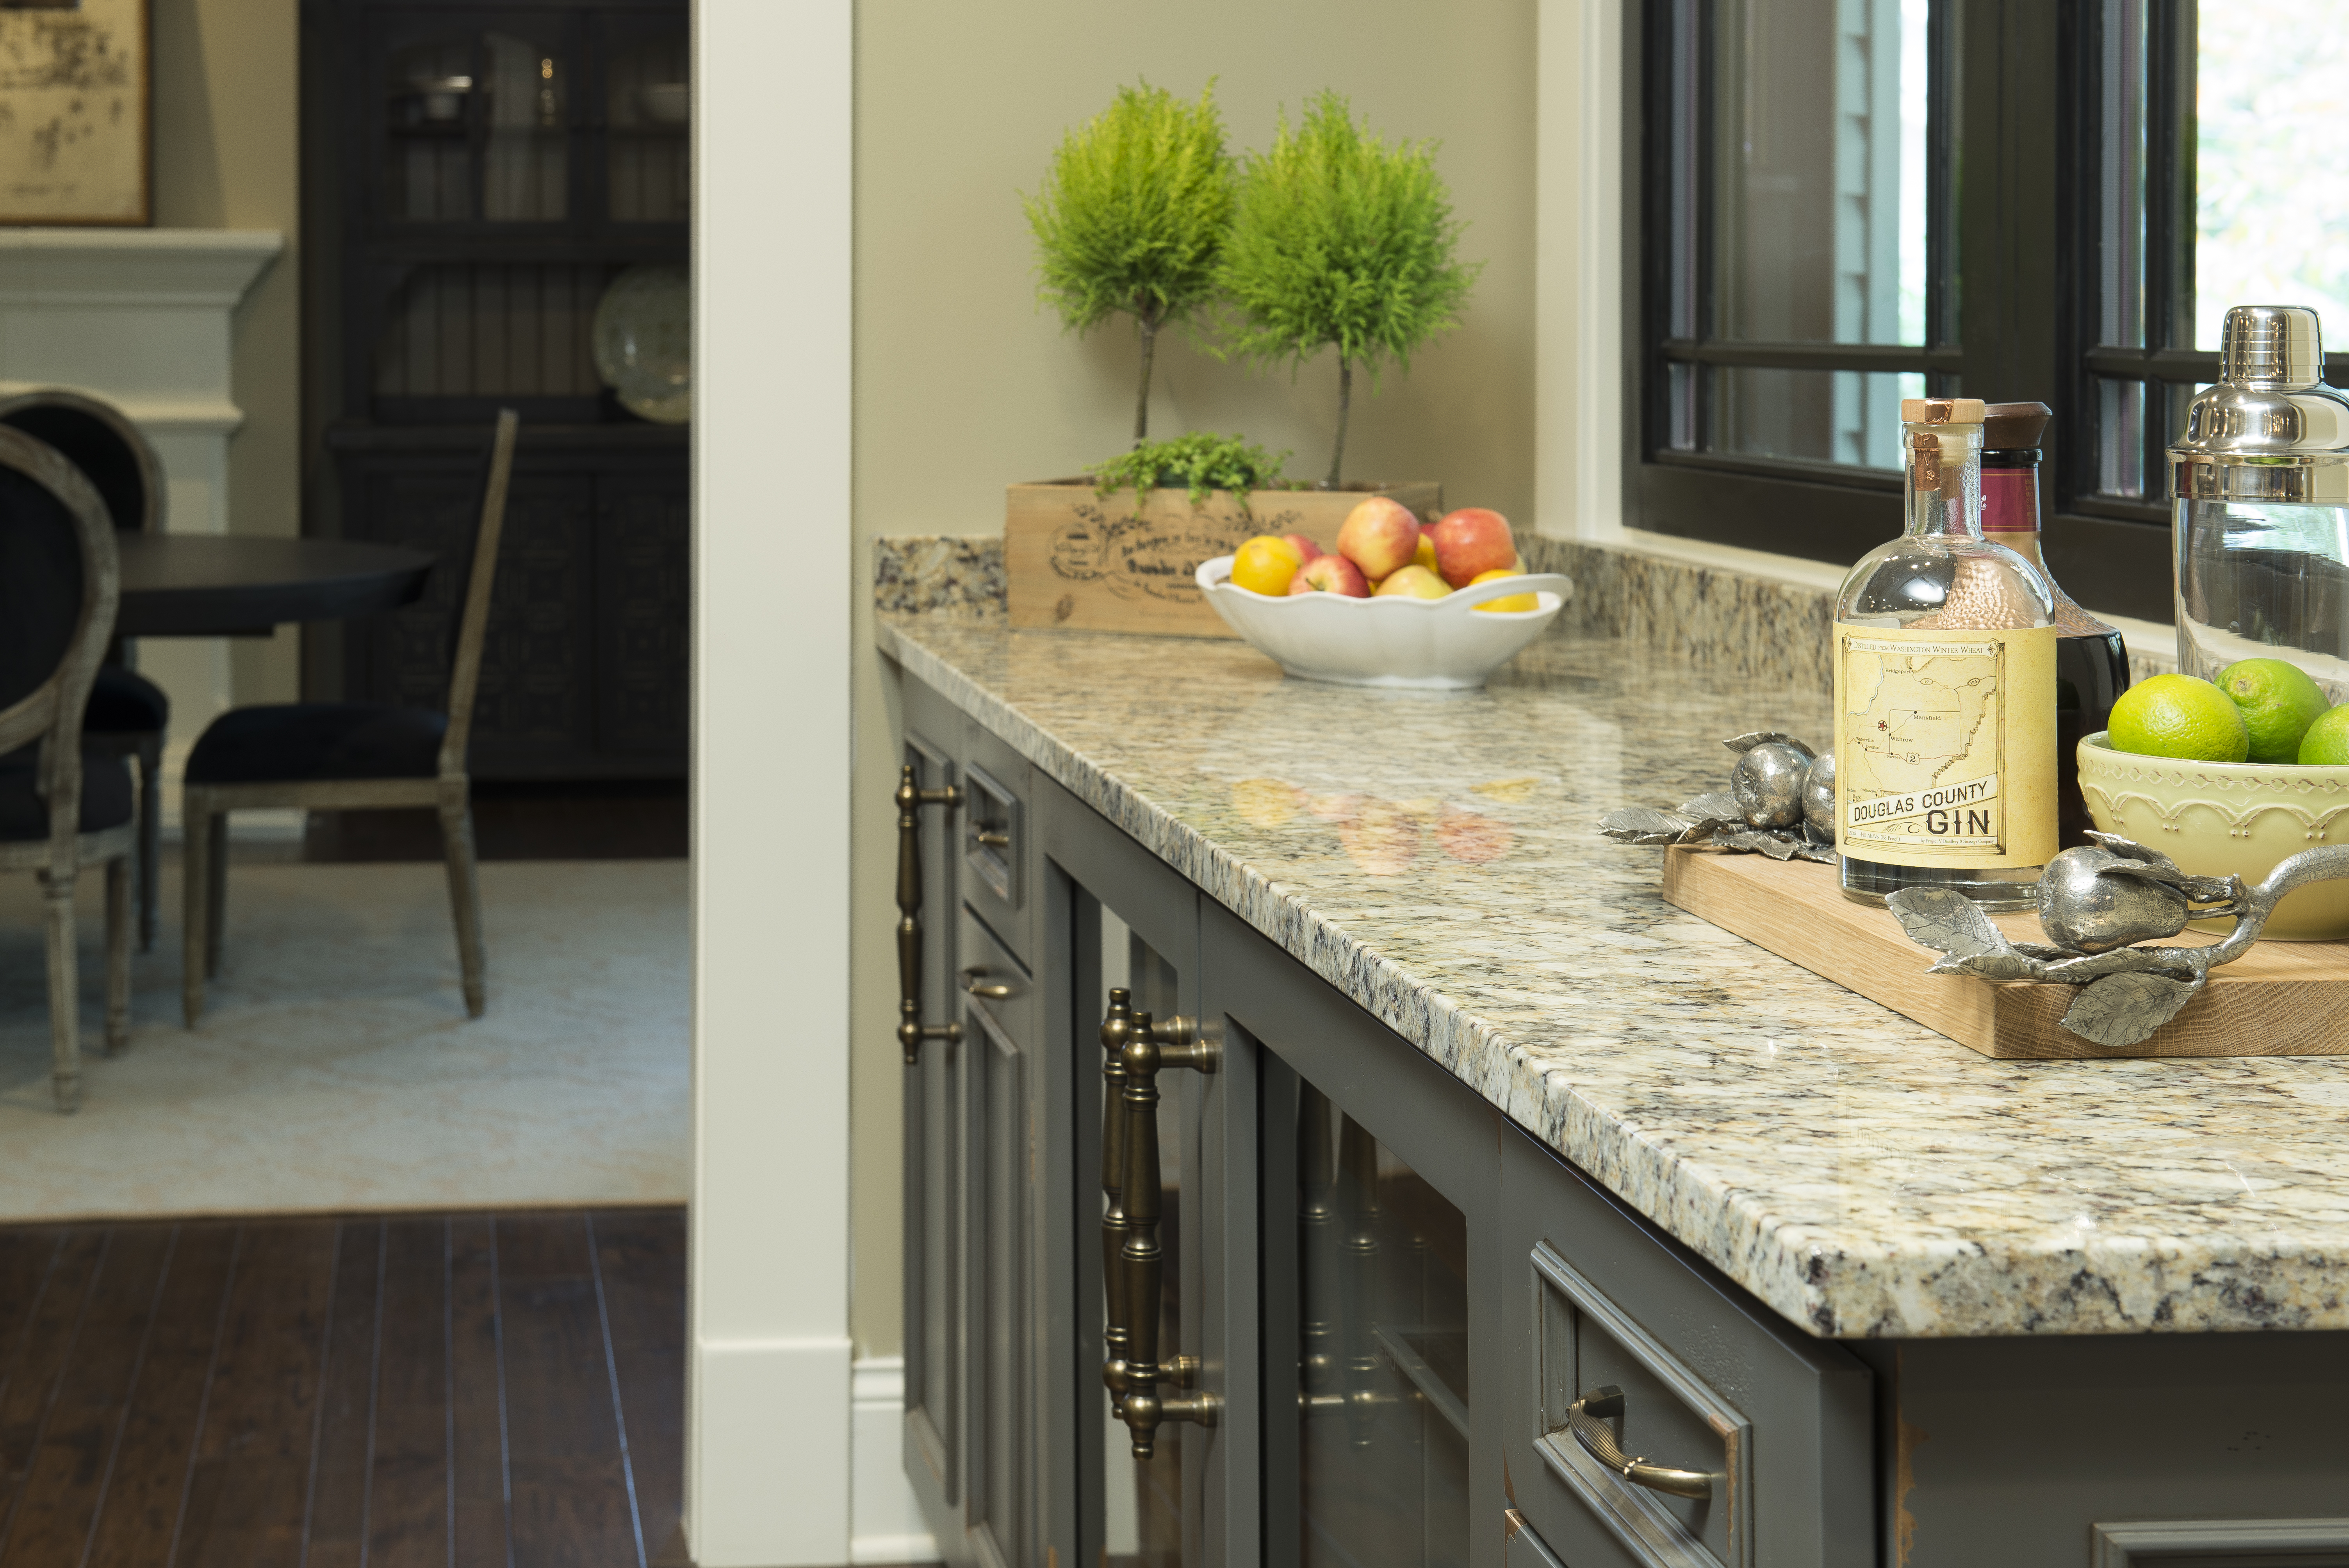 A beautiful wet bar area with kitchen cabinets that have a painted finish with distressed details. The dark gray paint is a classic kitchen cabinet color and pairs well with the traditional granite countertops.